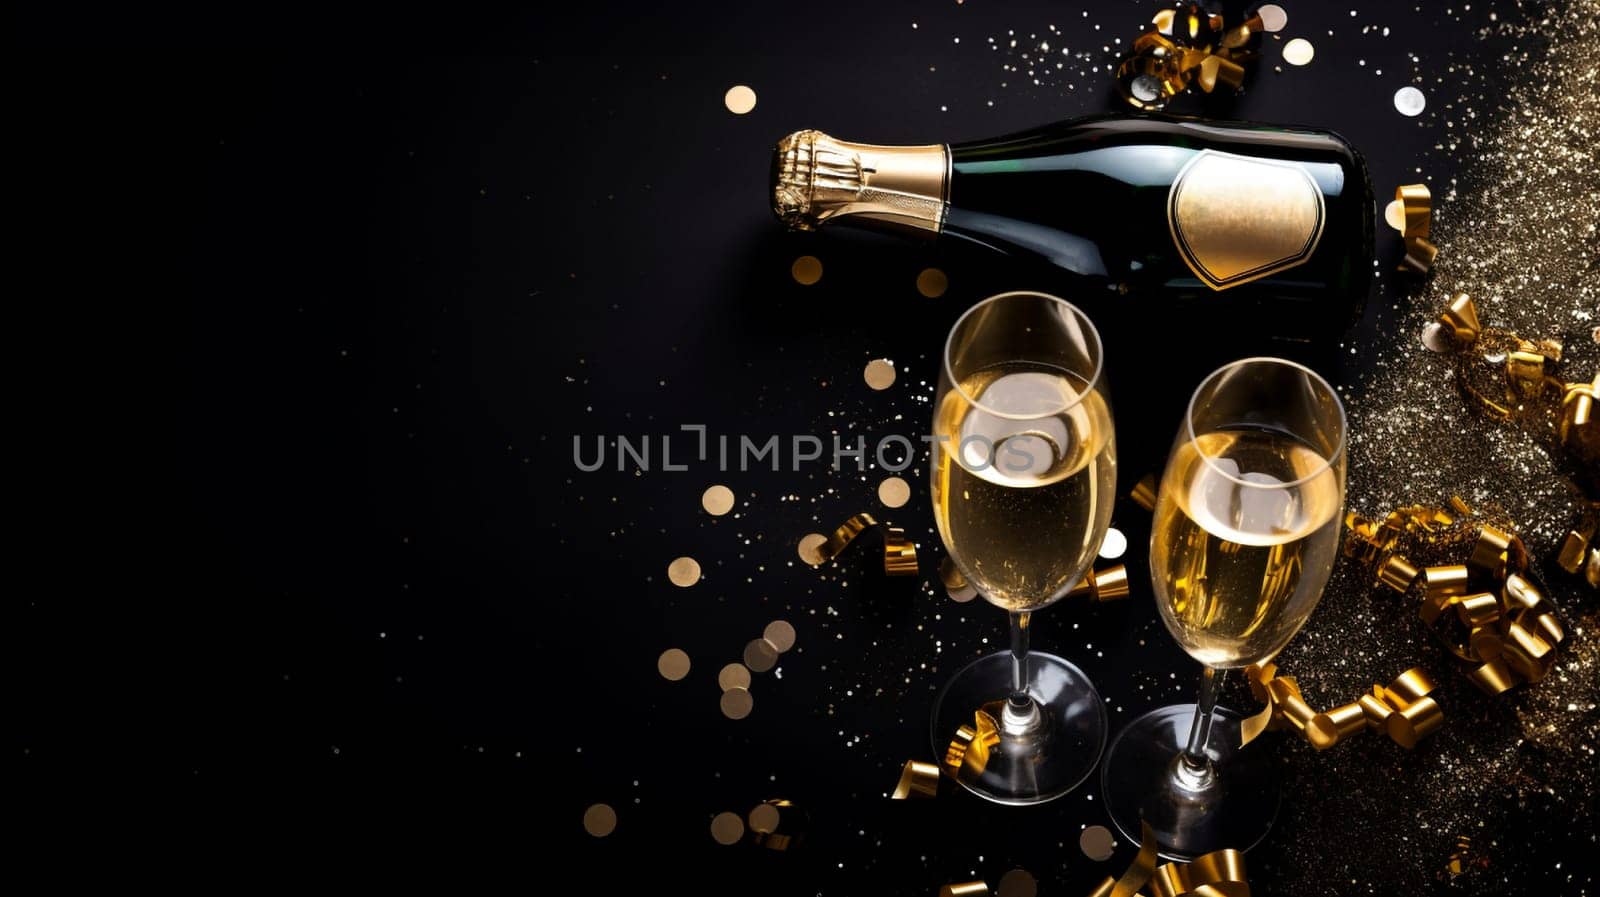 Premium Christmas Party Theme with Champagne Bottle, Wine Glasses, Golden Confetti, and Decorative Balls on a Stylish Dark Background. Lavish Flat Lay Arrangement with copy space.